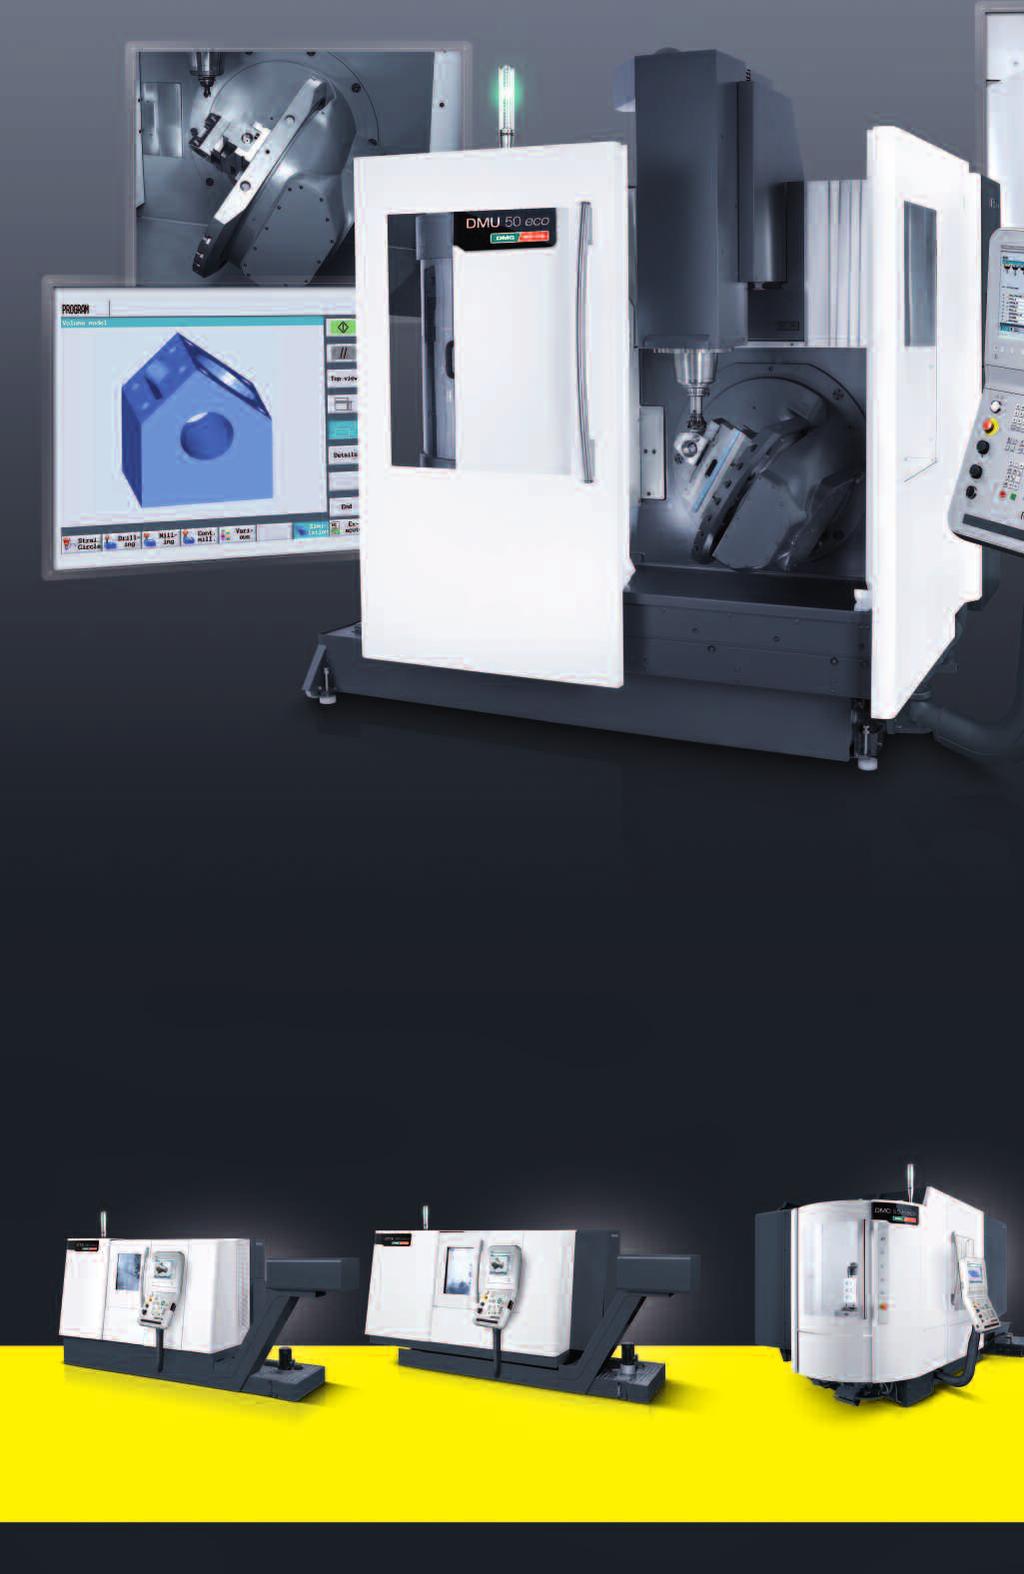 28 29 ECOLINE SERIES NC swivel rotary table with digital drives ShopMill software for the easiest Programming with 3D-simulation NEW // DMU 50 eco Entry into 5-axis machining dmu 50 eco highlights